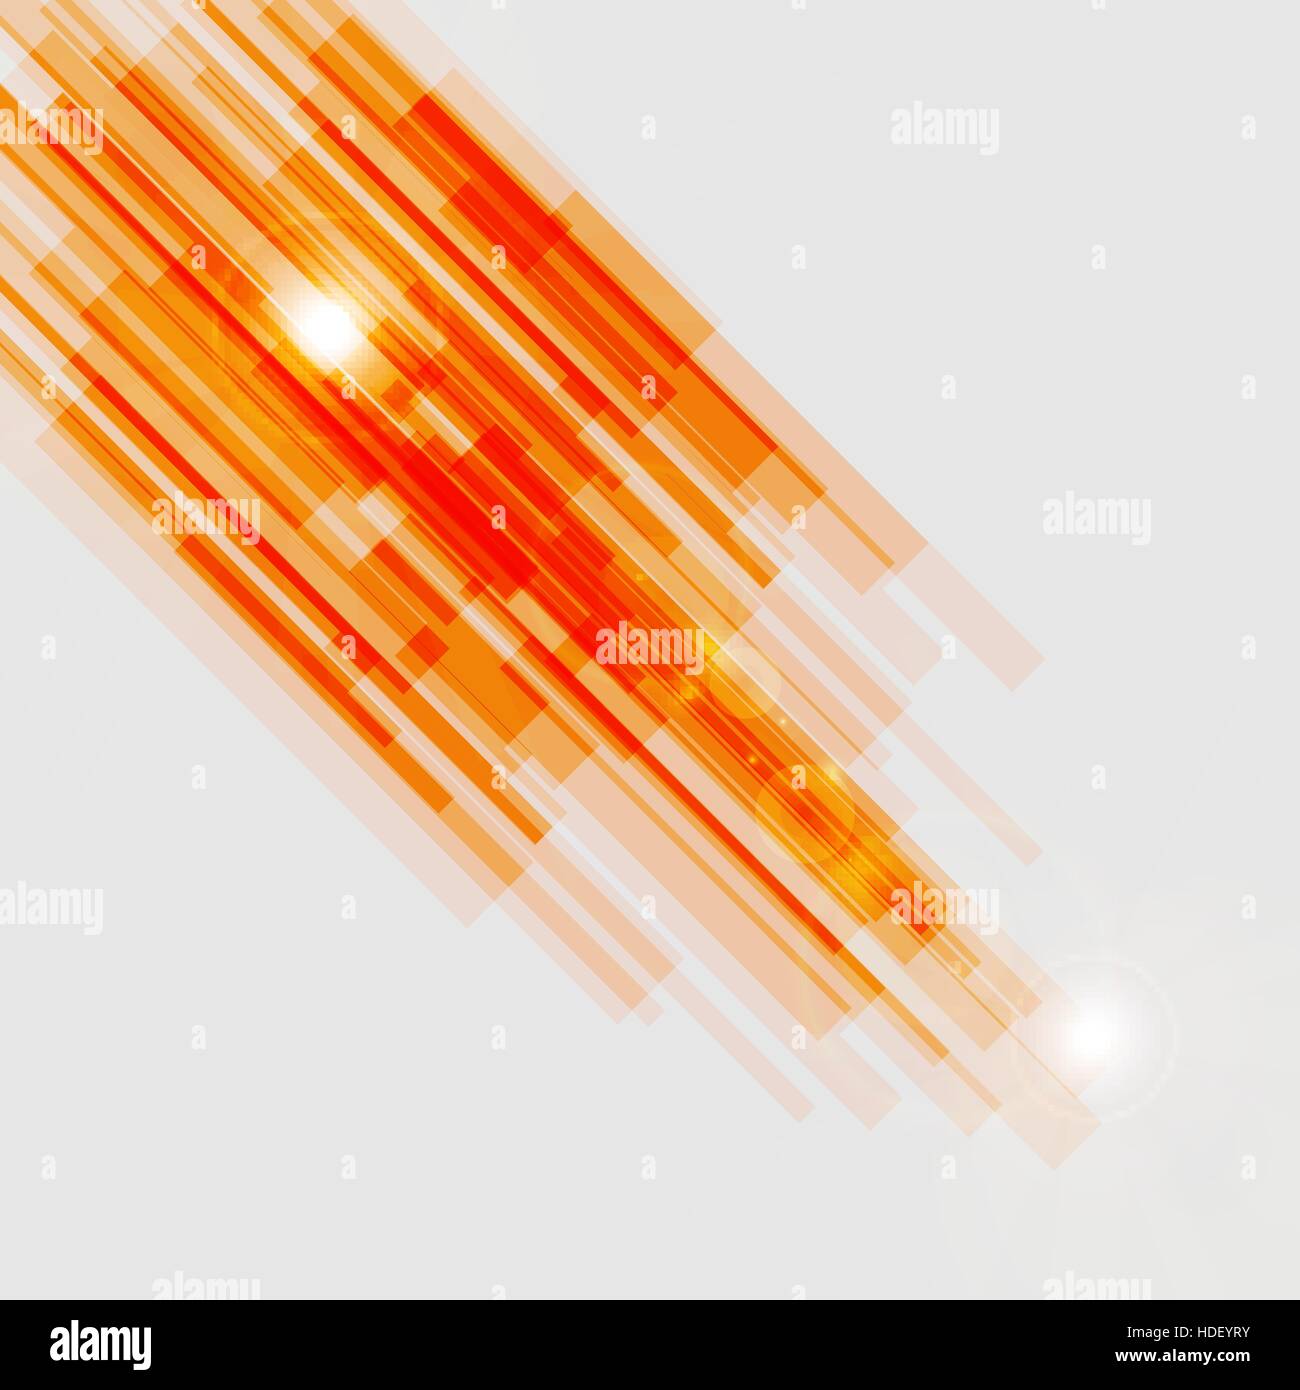 Orange straight lines abstract background, stock vector Stock Vector